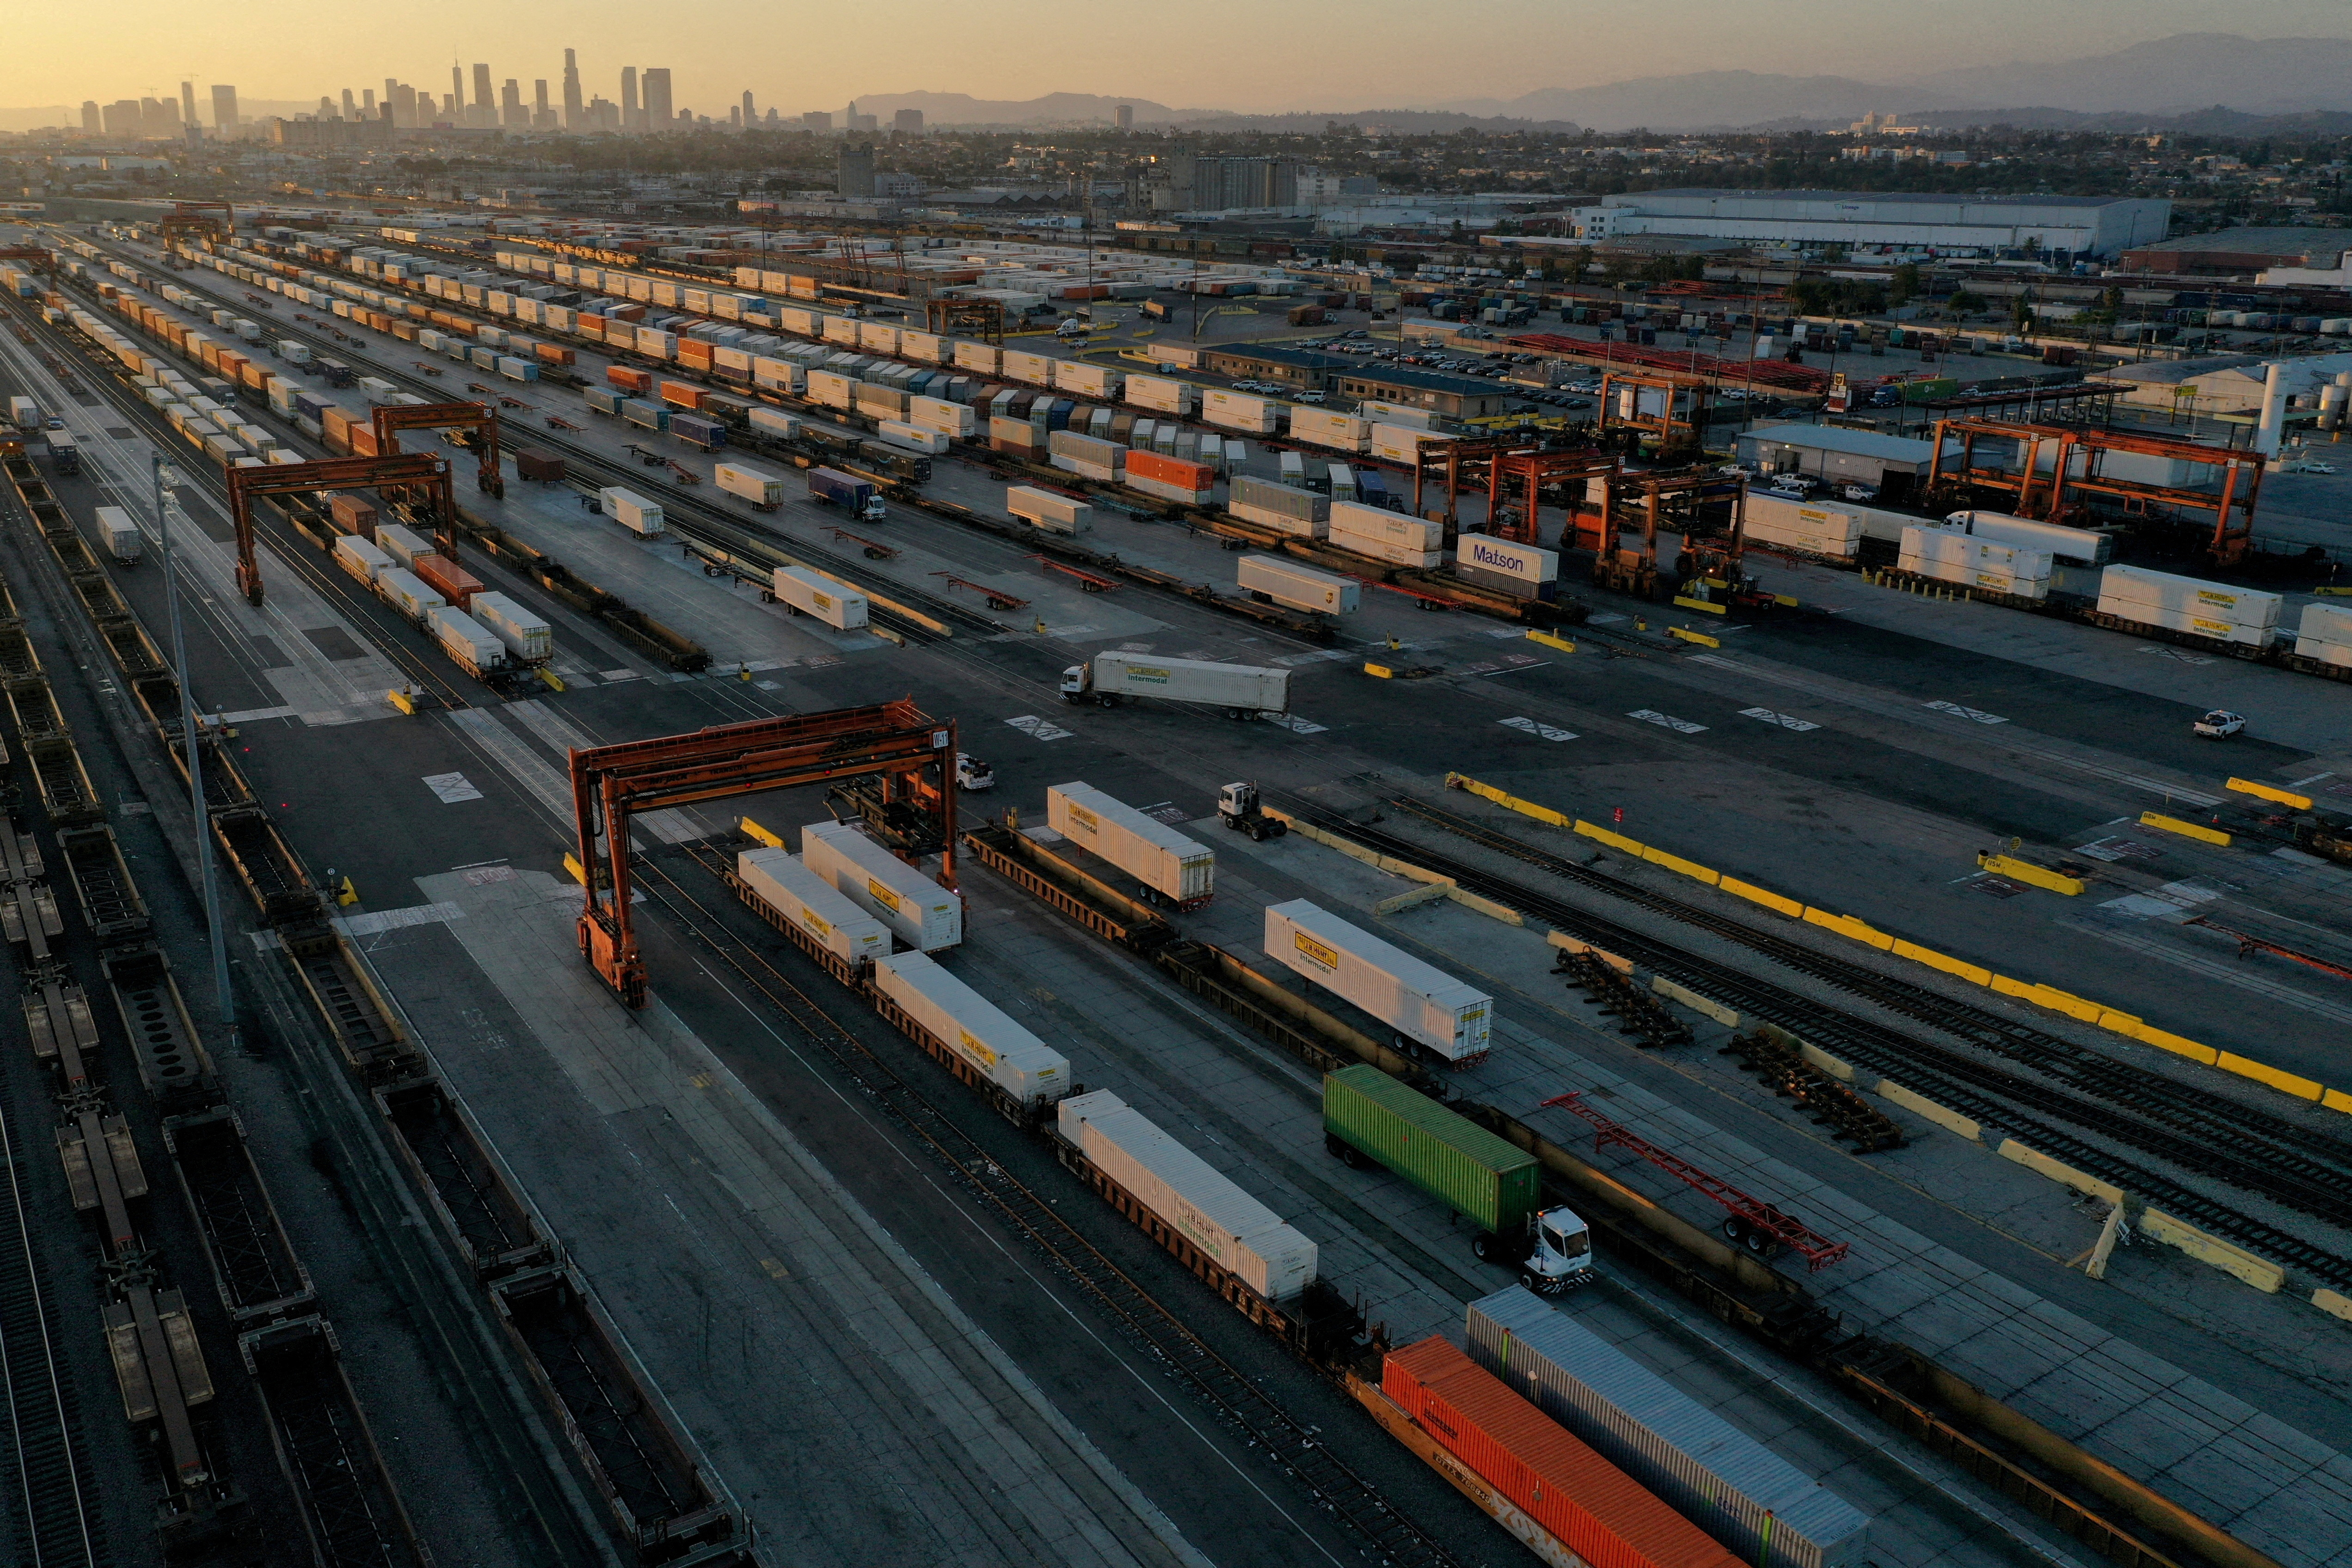 An aerial view of gantry cranes, shipping containers, and freight railway trains  in Commerce